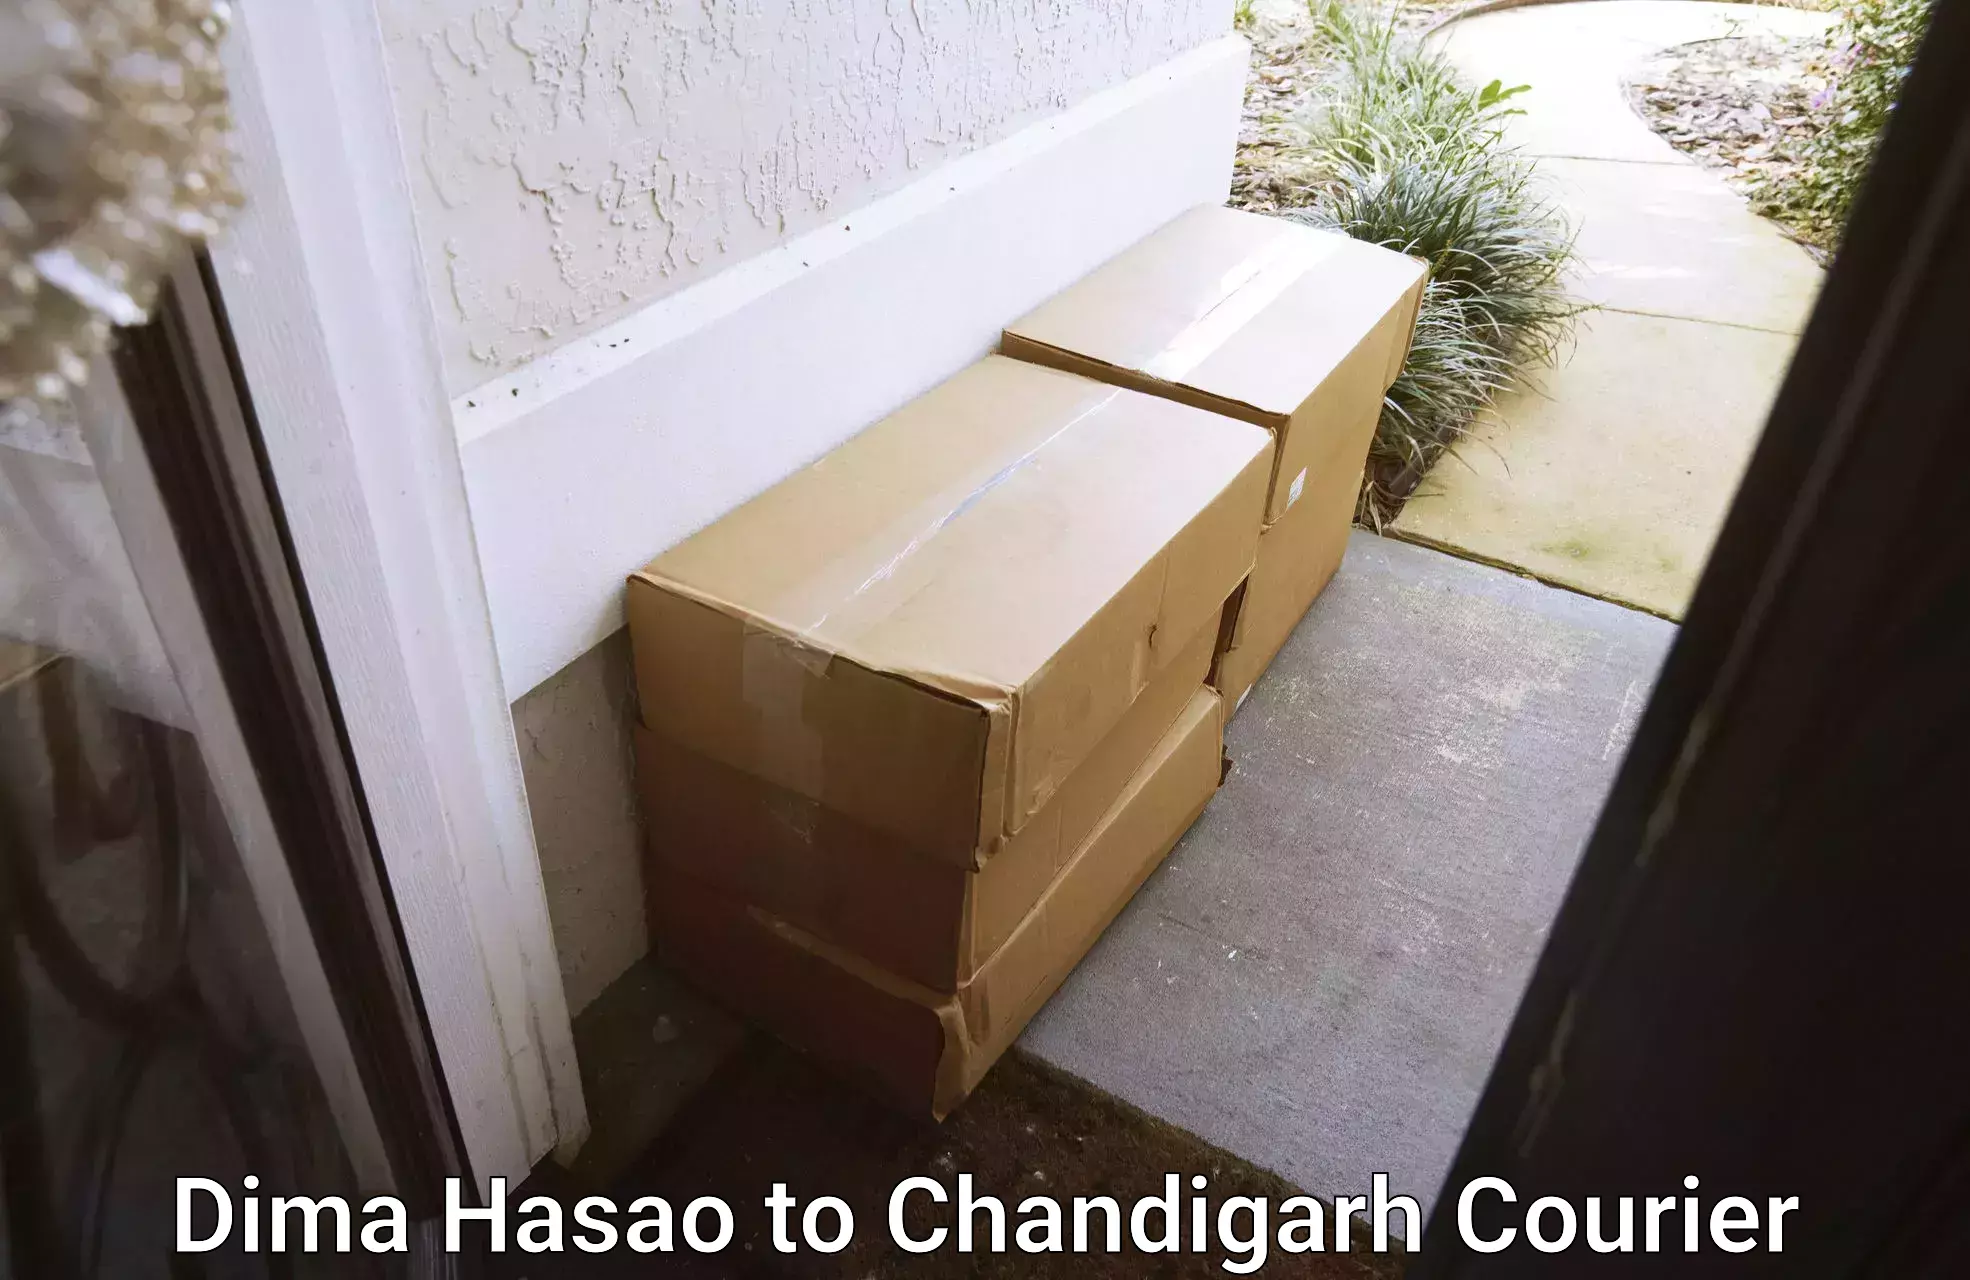 Enhanced tracking features Dima Hasao to Chandigarh